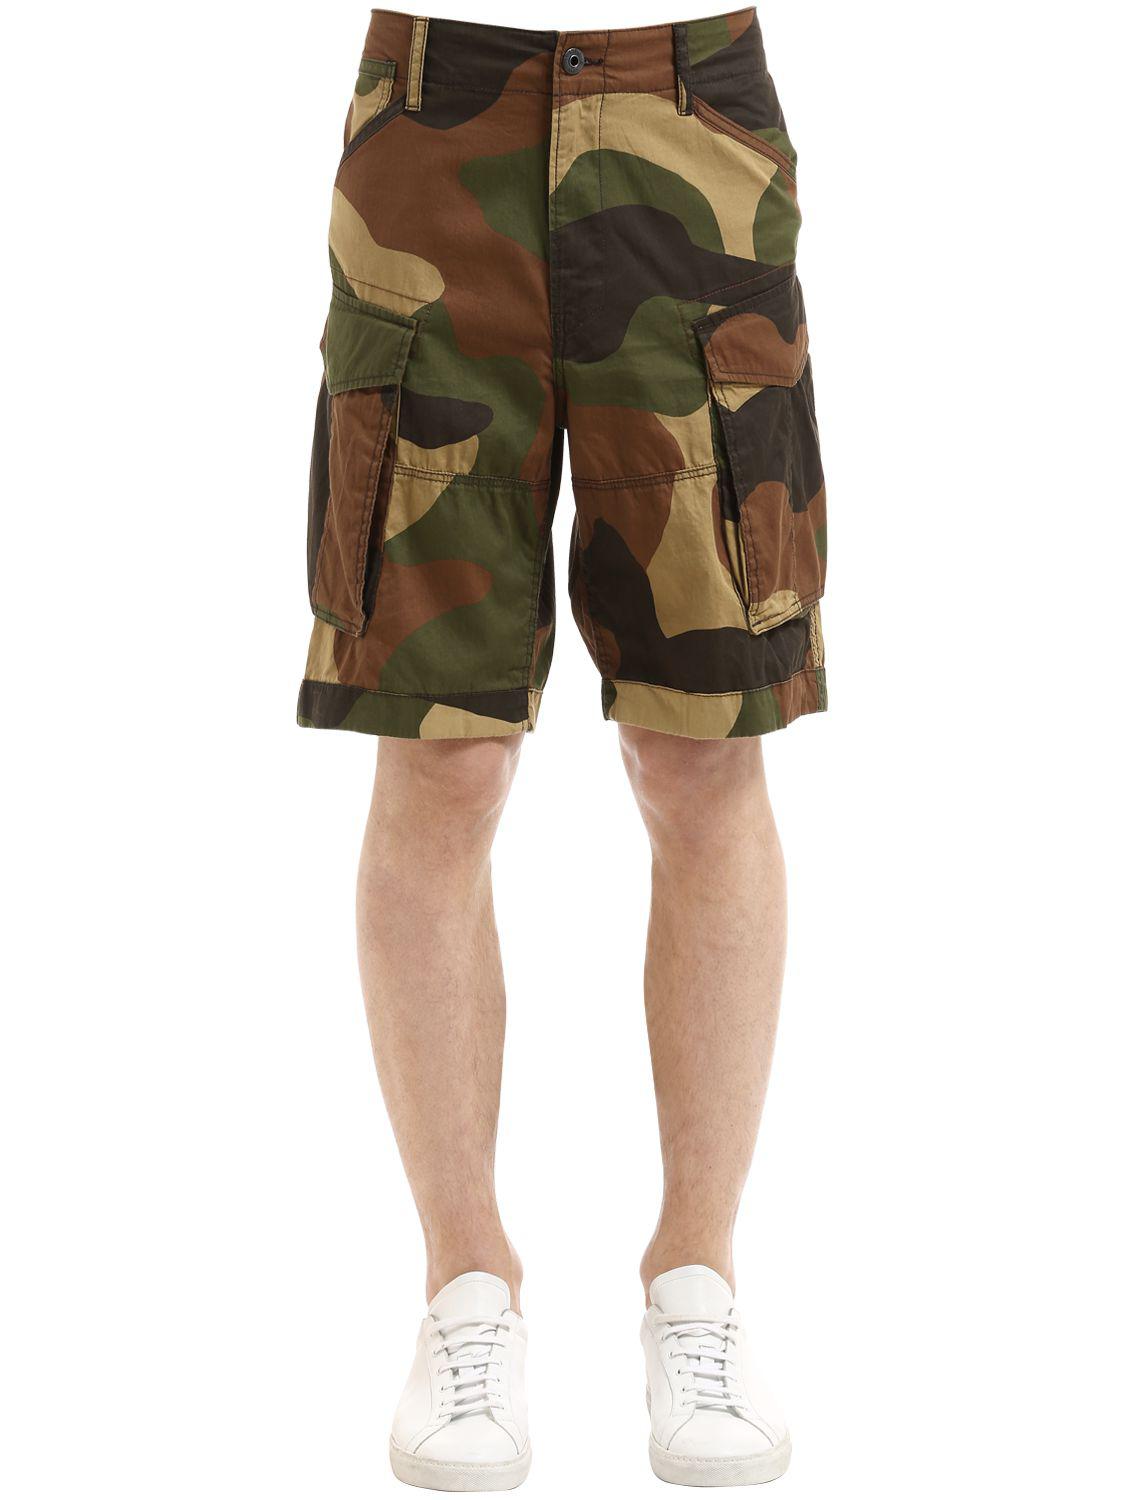 G-Star RAW Rovic Loose Camo Twill Cargo Shorts in 29-30-31-32-33-34-36-38  (Green) for Men - Lyst